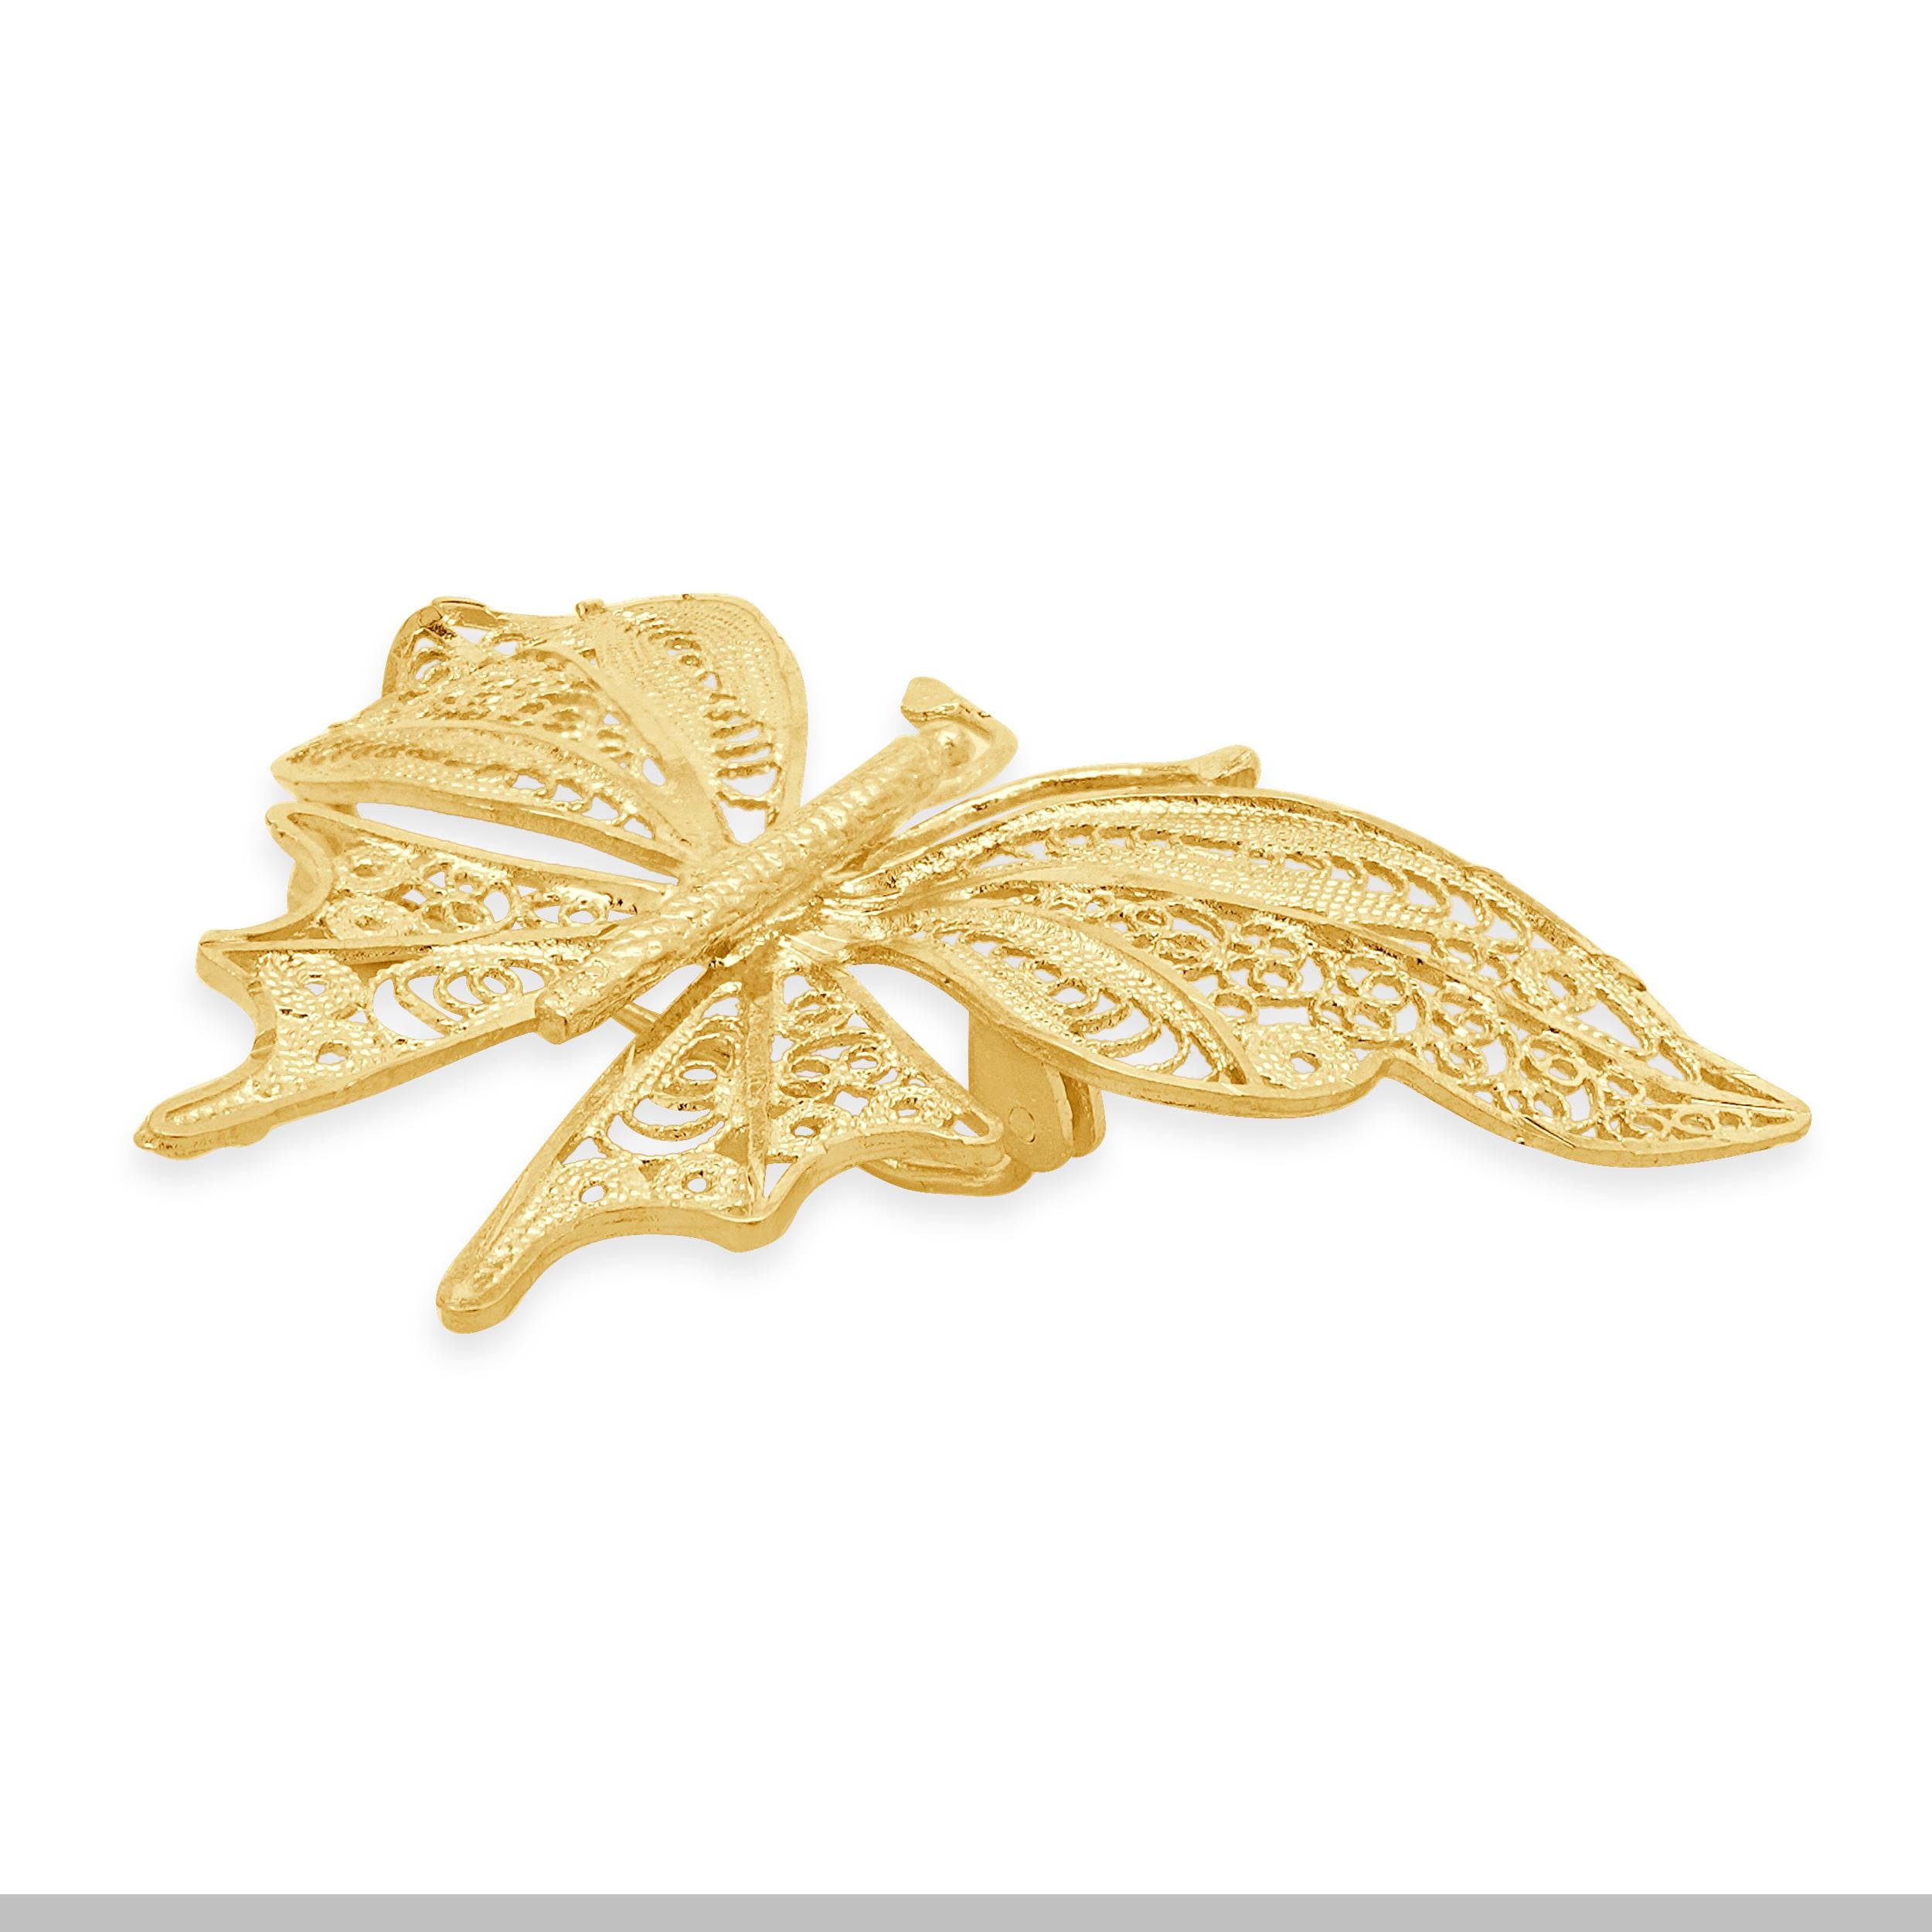 14 Karat yellow Gold Butterfly Pin In Excellent Condition For Sale In Scottsdale, AZ